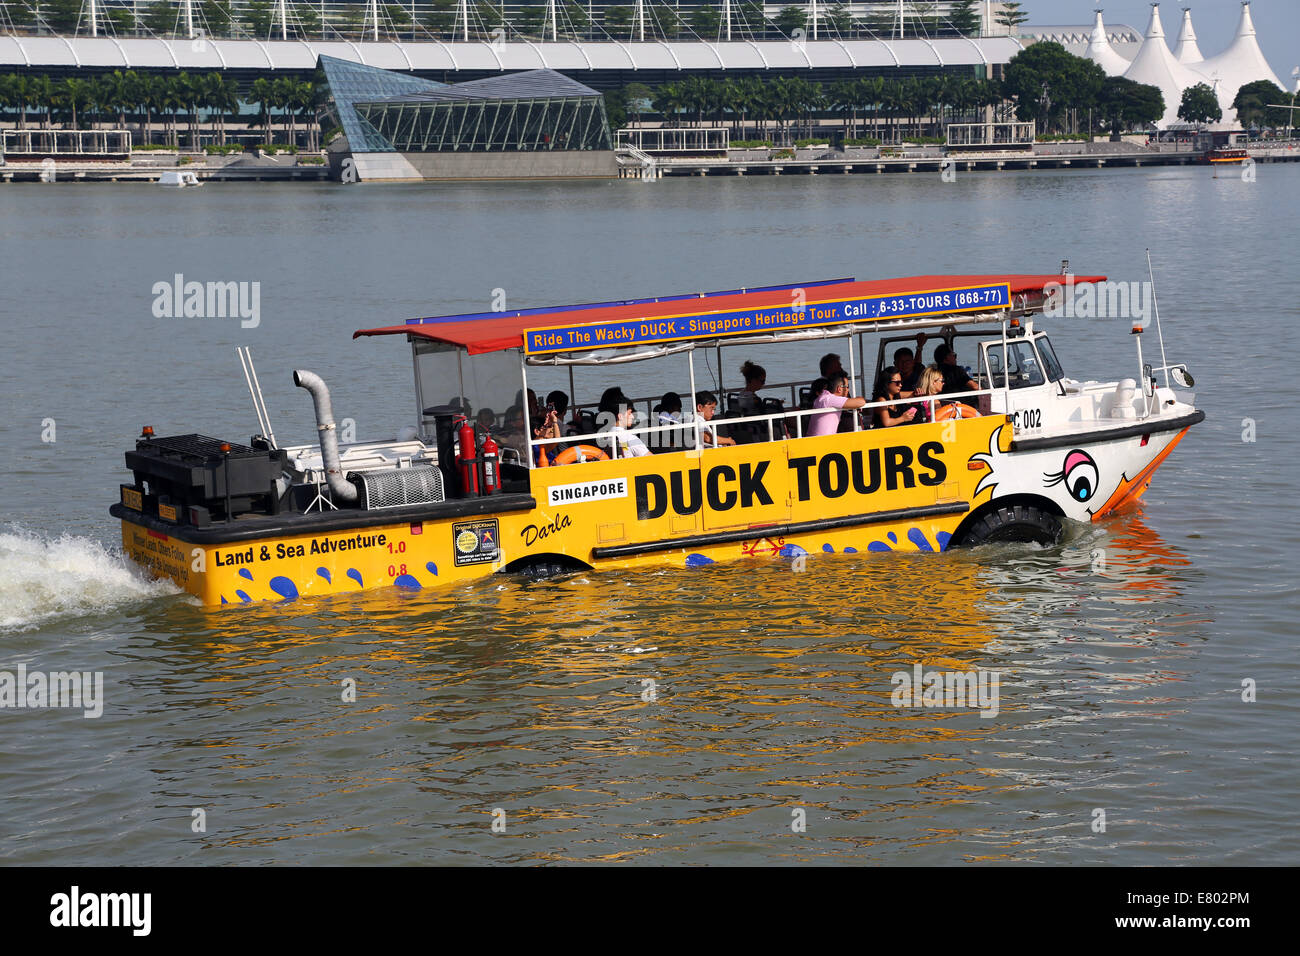 Duck tours for sightseeing tourists in Marina Bay in Singapore, Republic of Singapore Stock Photo